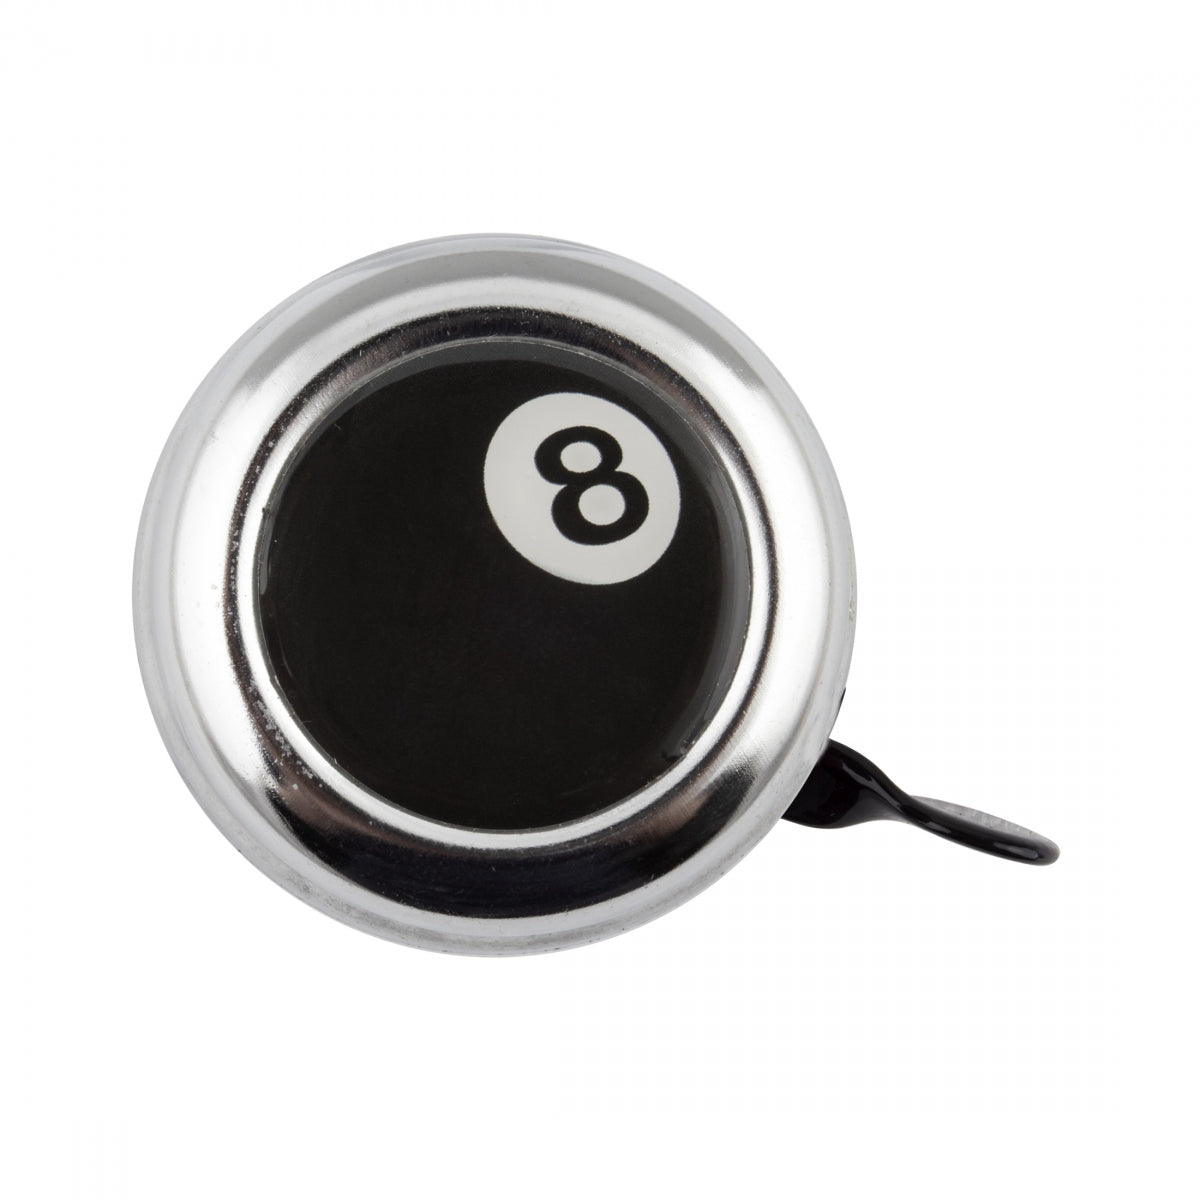 BELL CLEAN MOTION SWELL 8-BALL